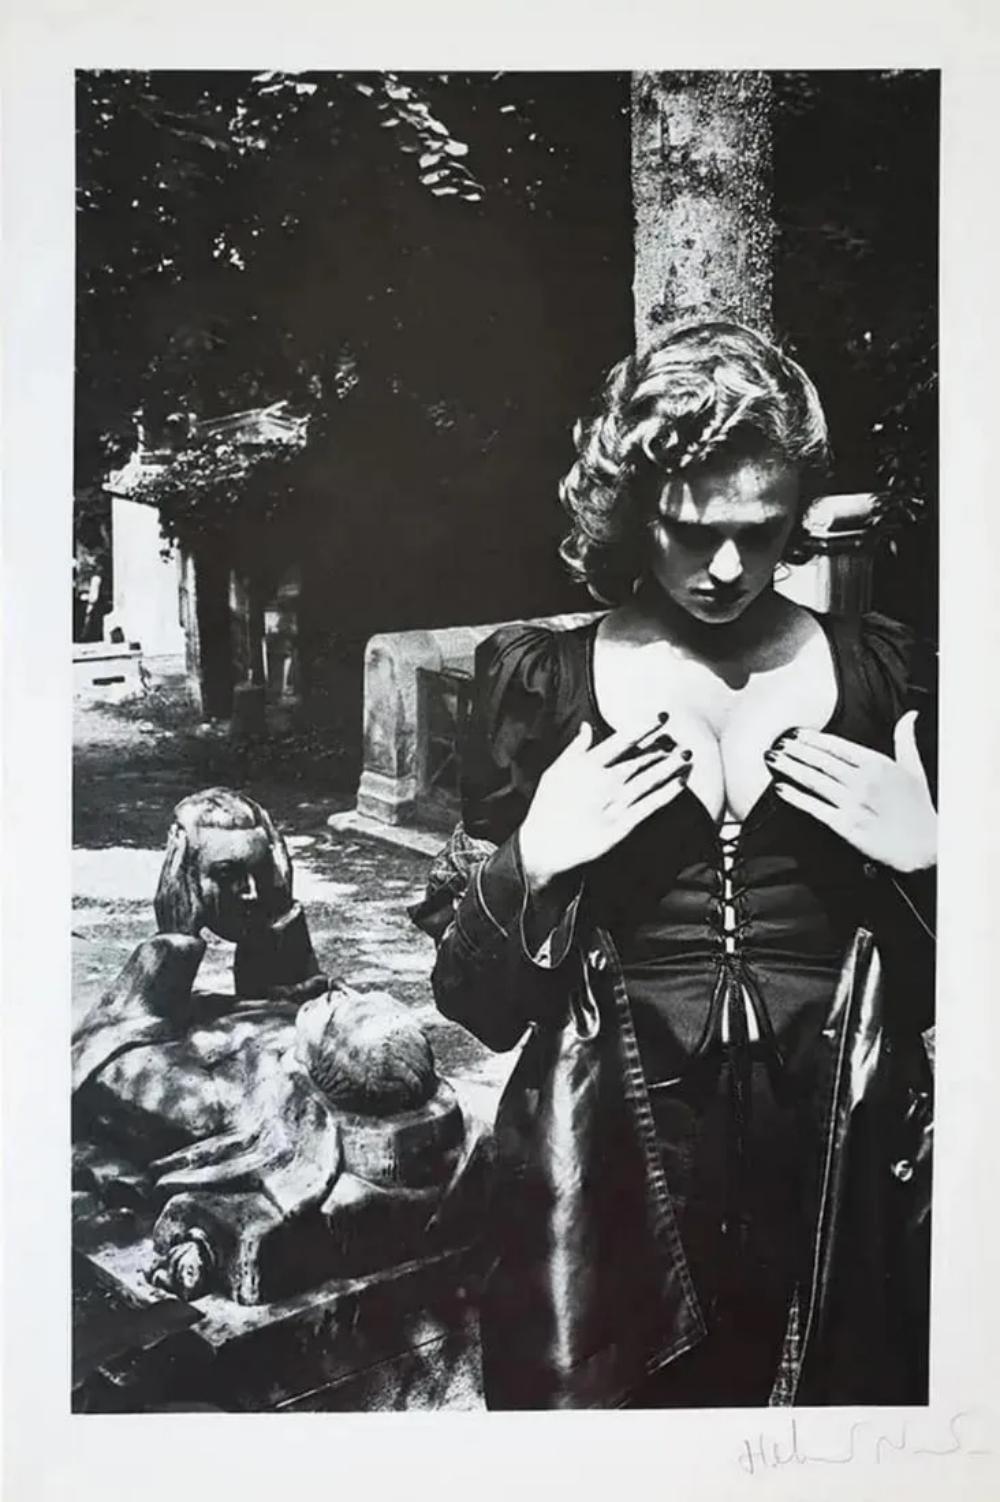 HELMUT NEWTON 'PERE LACHAISE TOMB OF TALMA 1977' HAND SIGNED - Contemporary Photograph by Helmut Newton